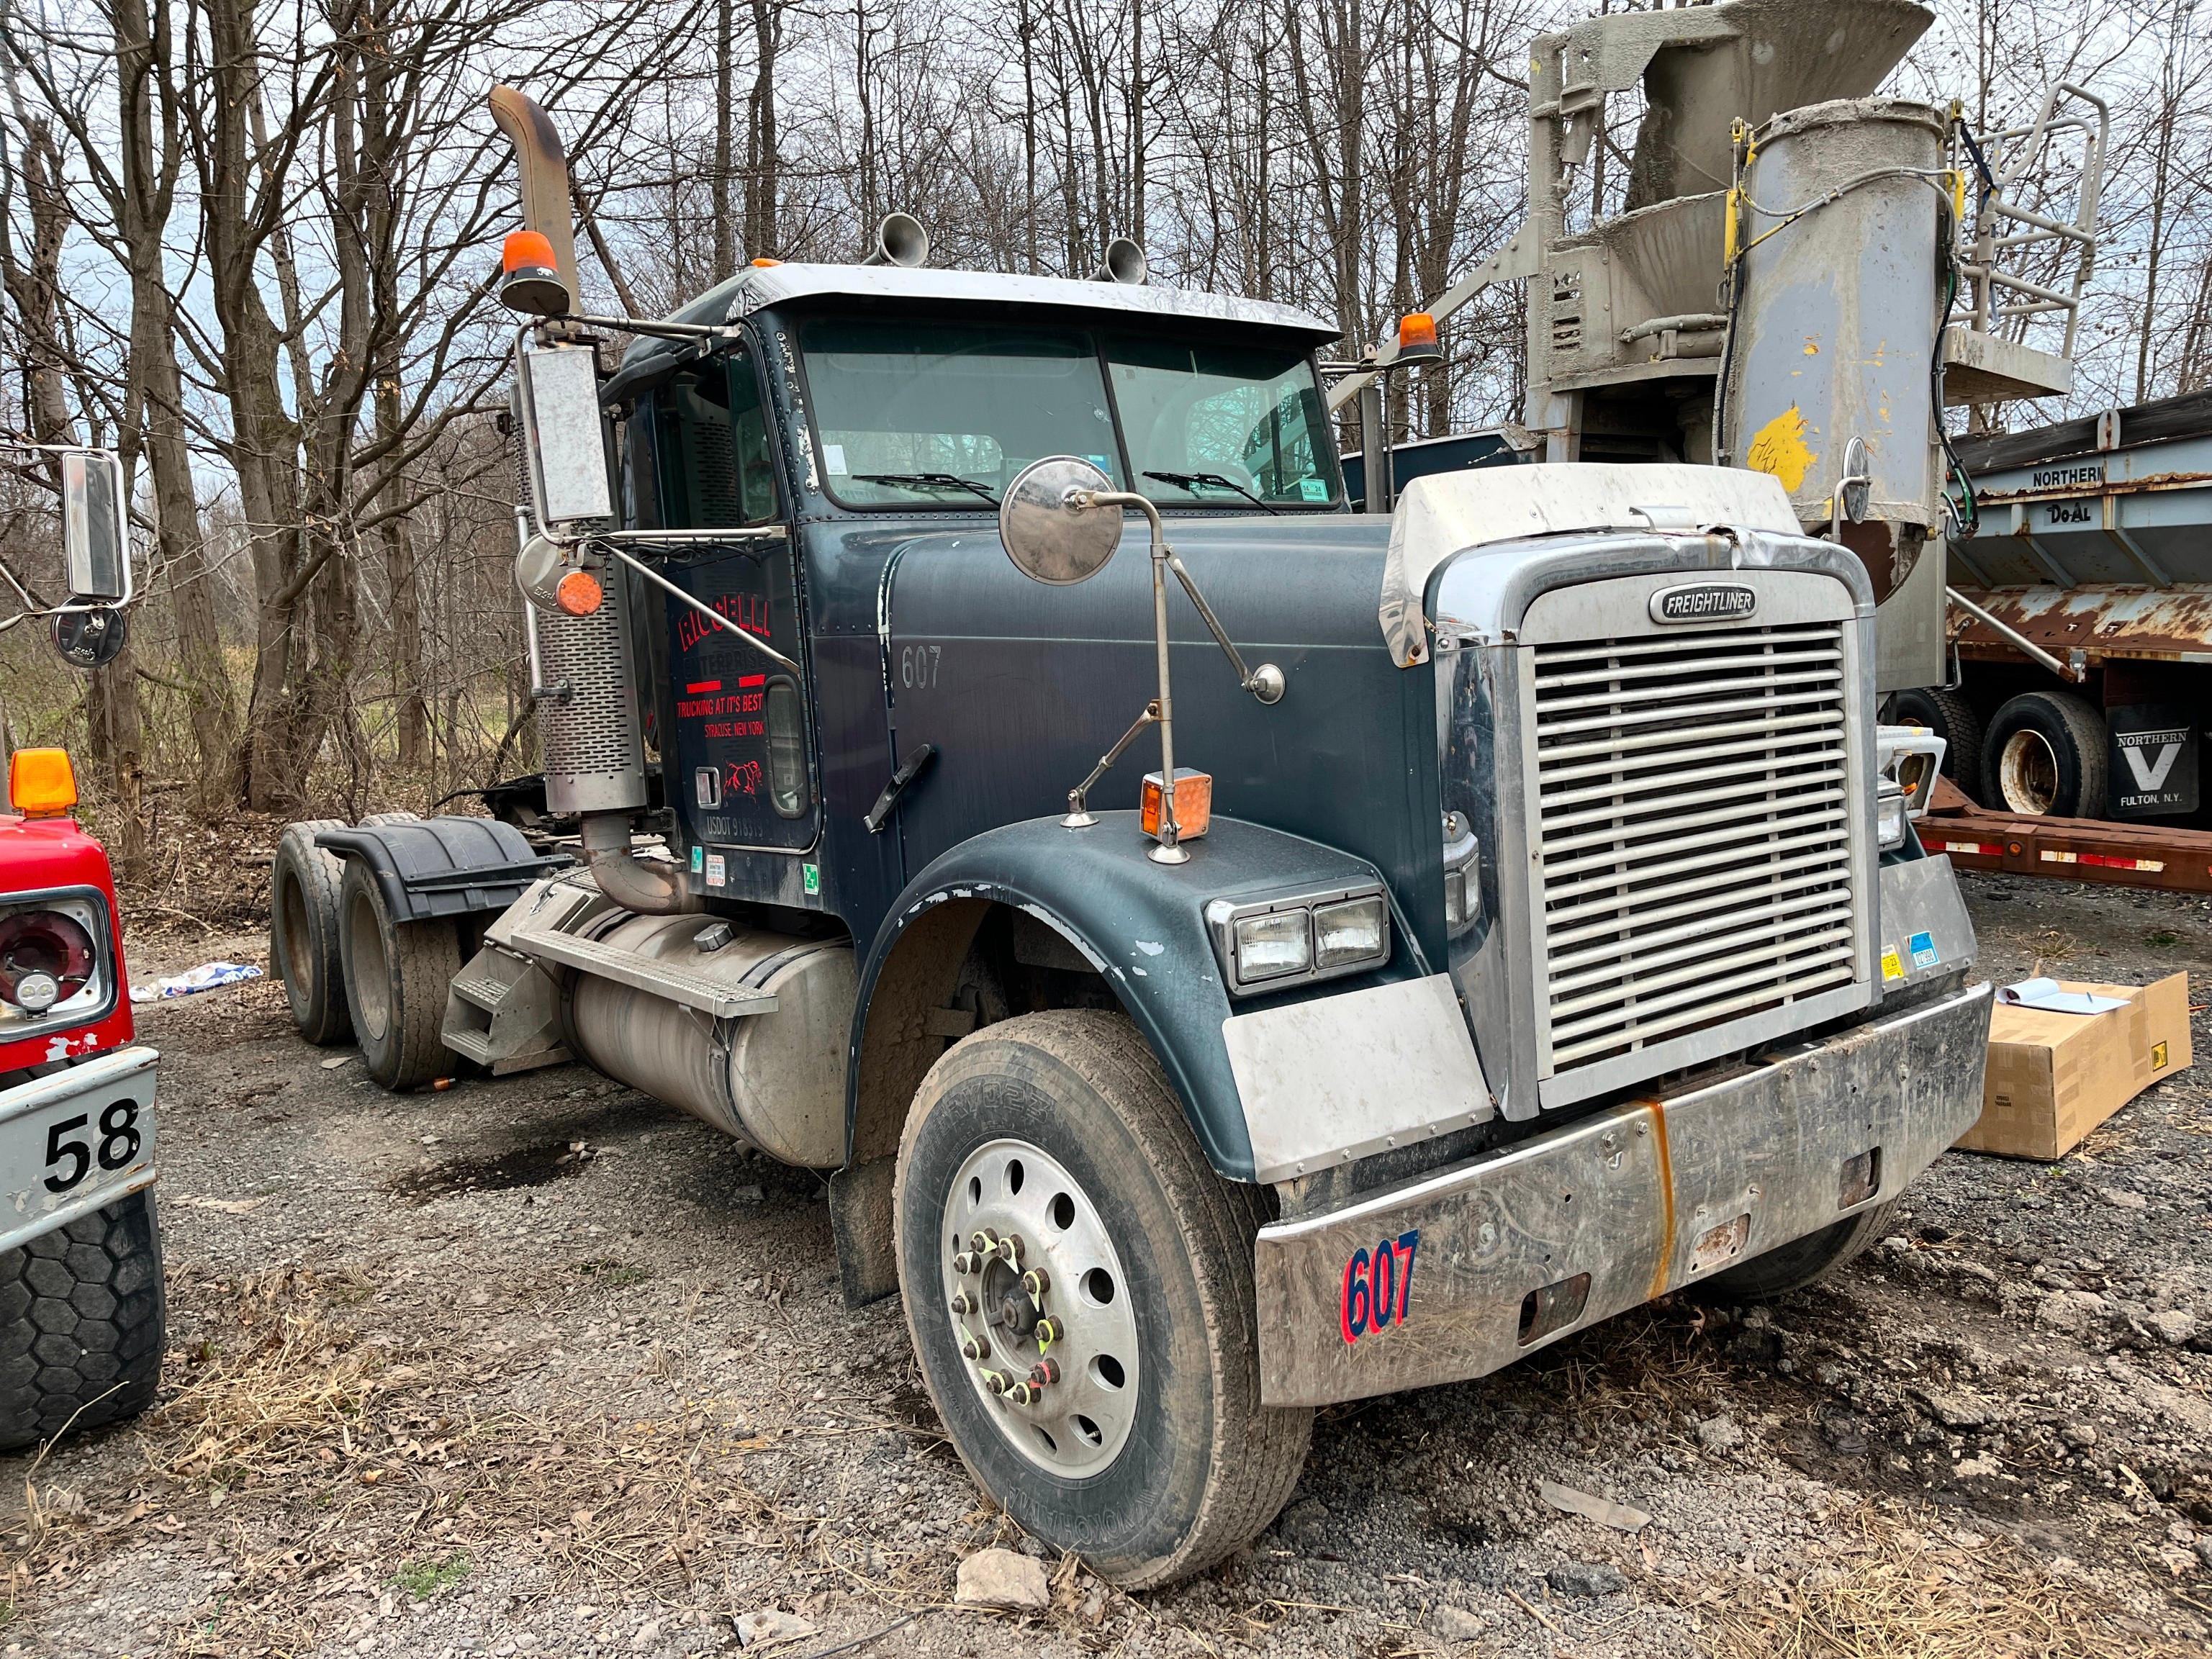 2006 FREIGHTLINER FLD120 TRUCK TRACTOR VN:W31443powered by Cat diesel engine, equipped with Eaton